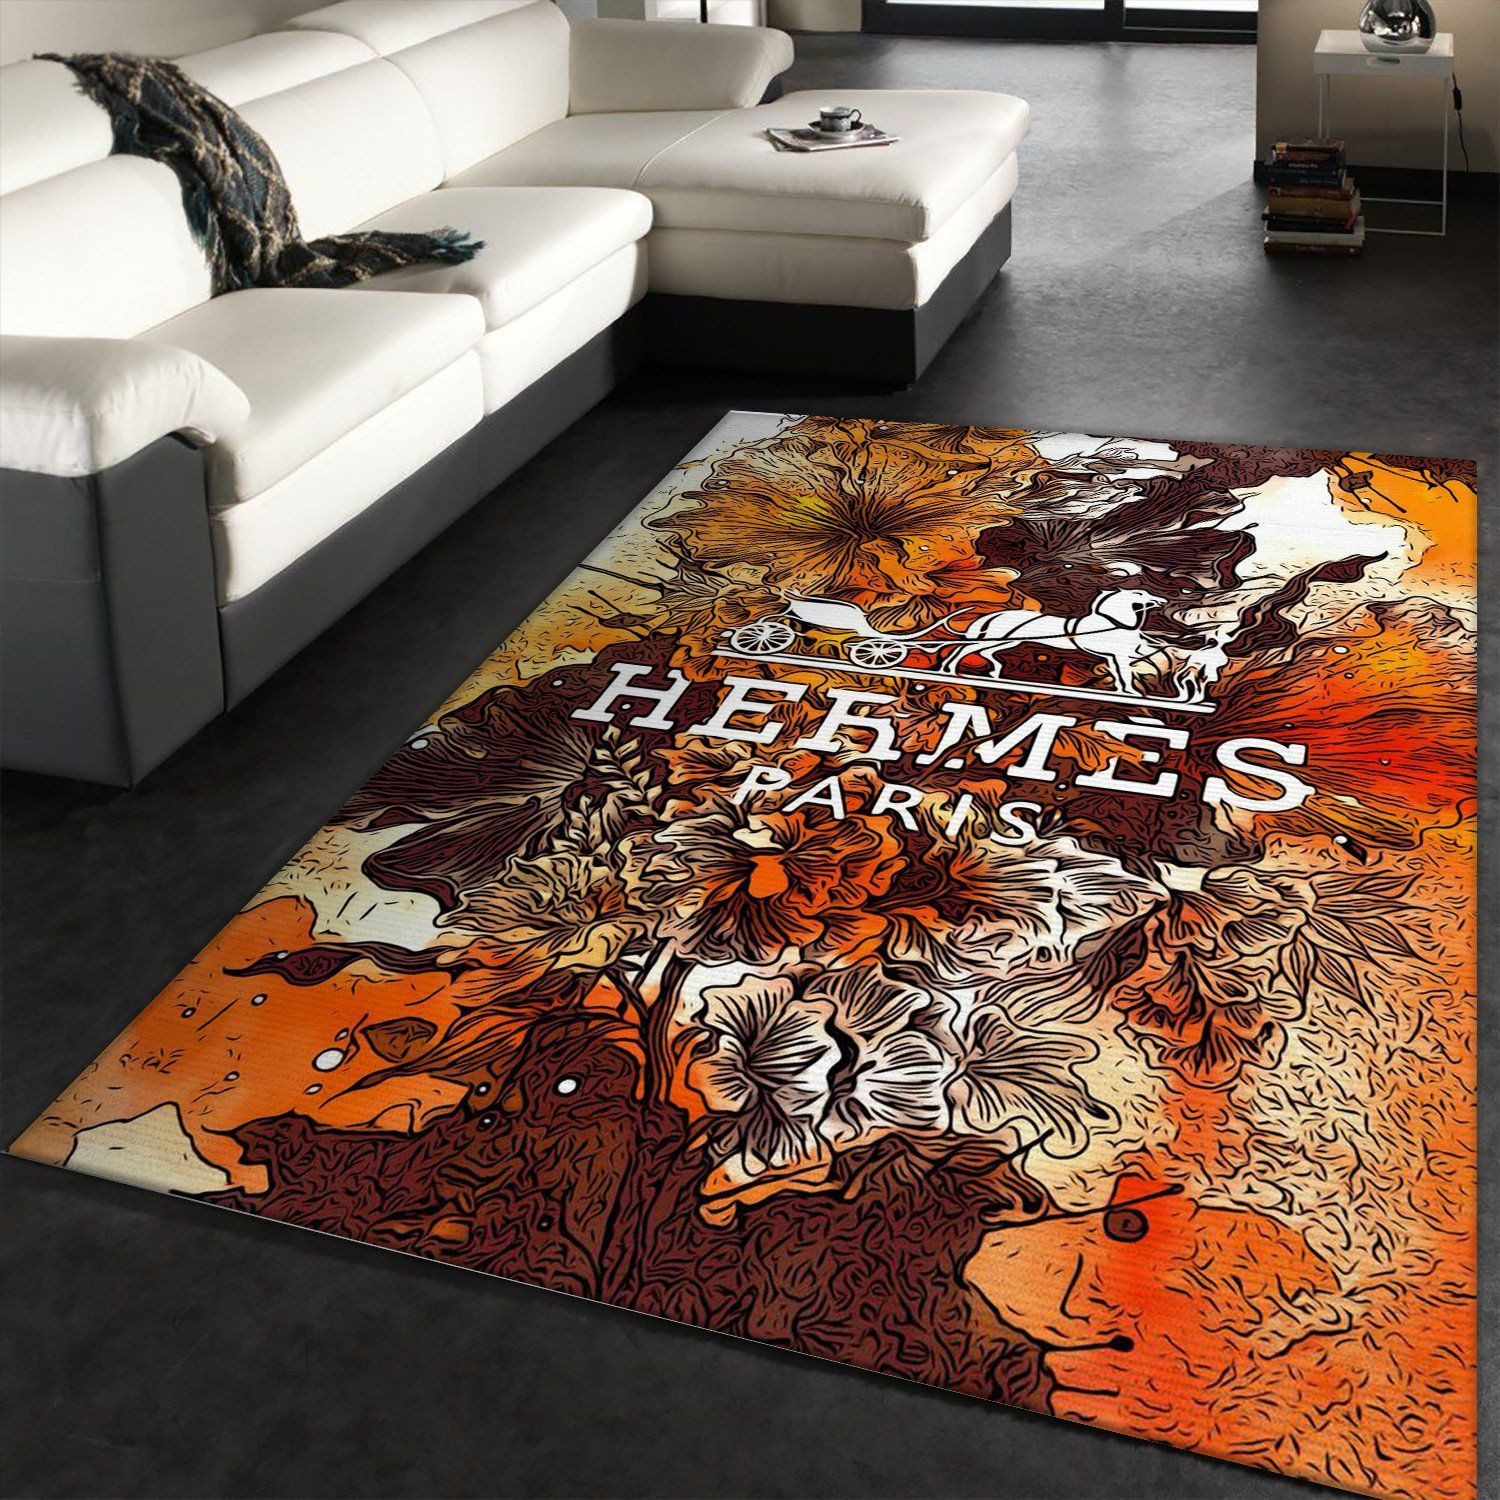 Rugs in Living Room and Bedroom - Hermes area rug living room rug christmas gift us decor